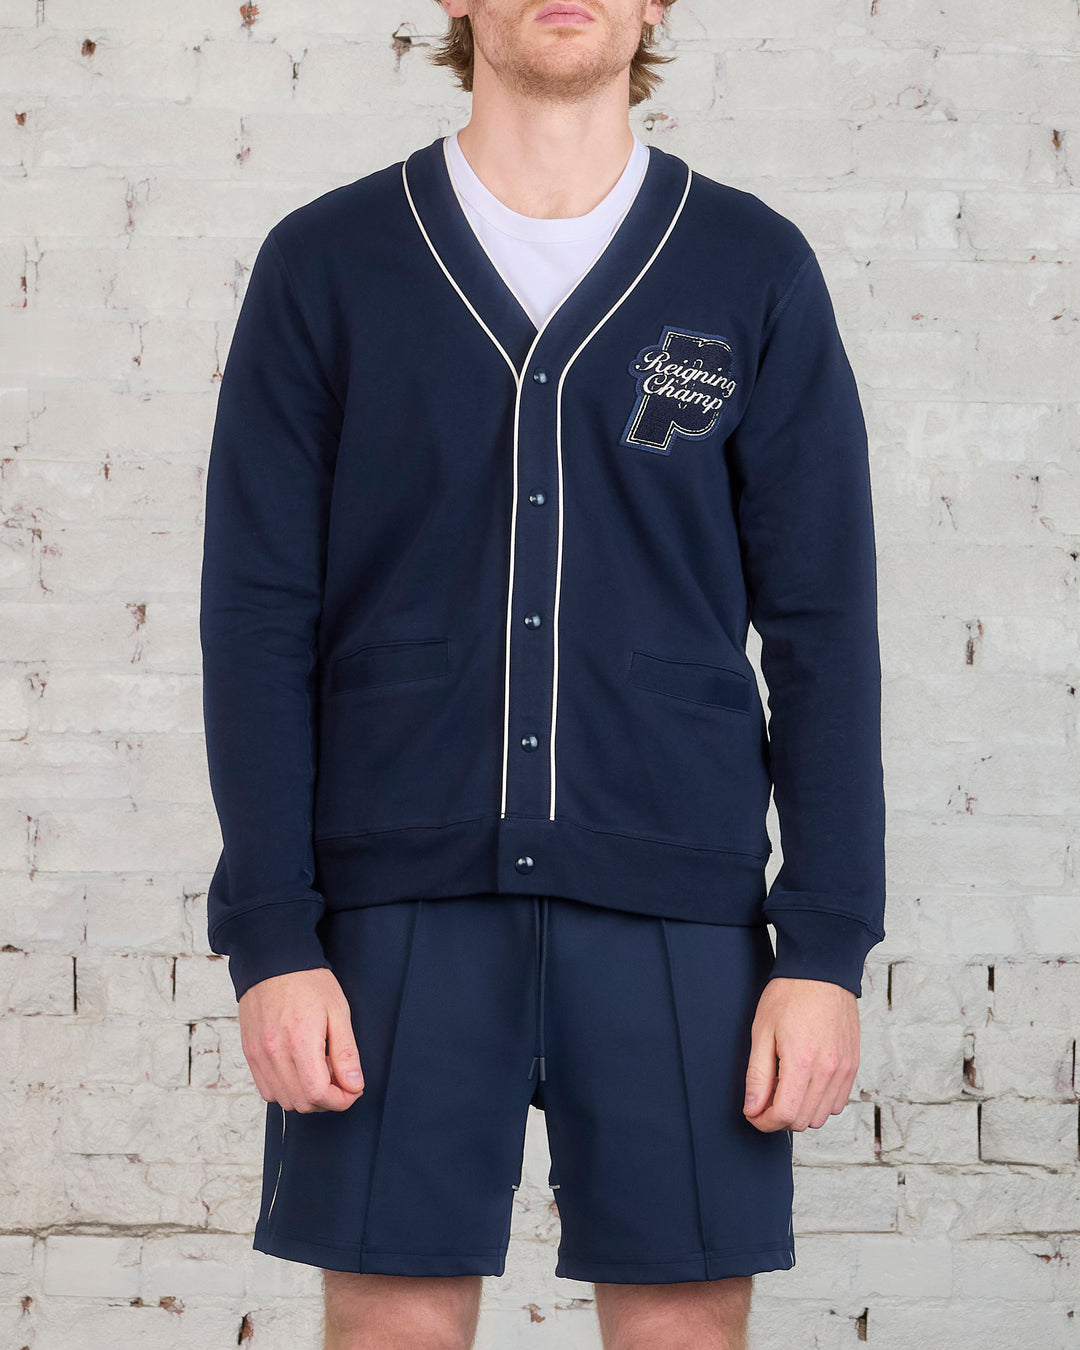 Reigning Champ x Prince Lightweight Terry Cardigan Navy